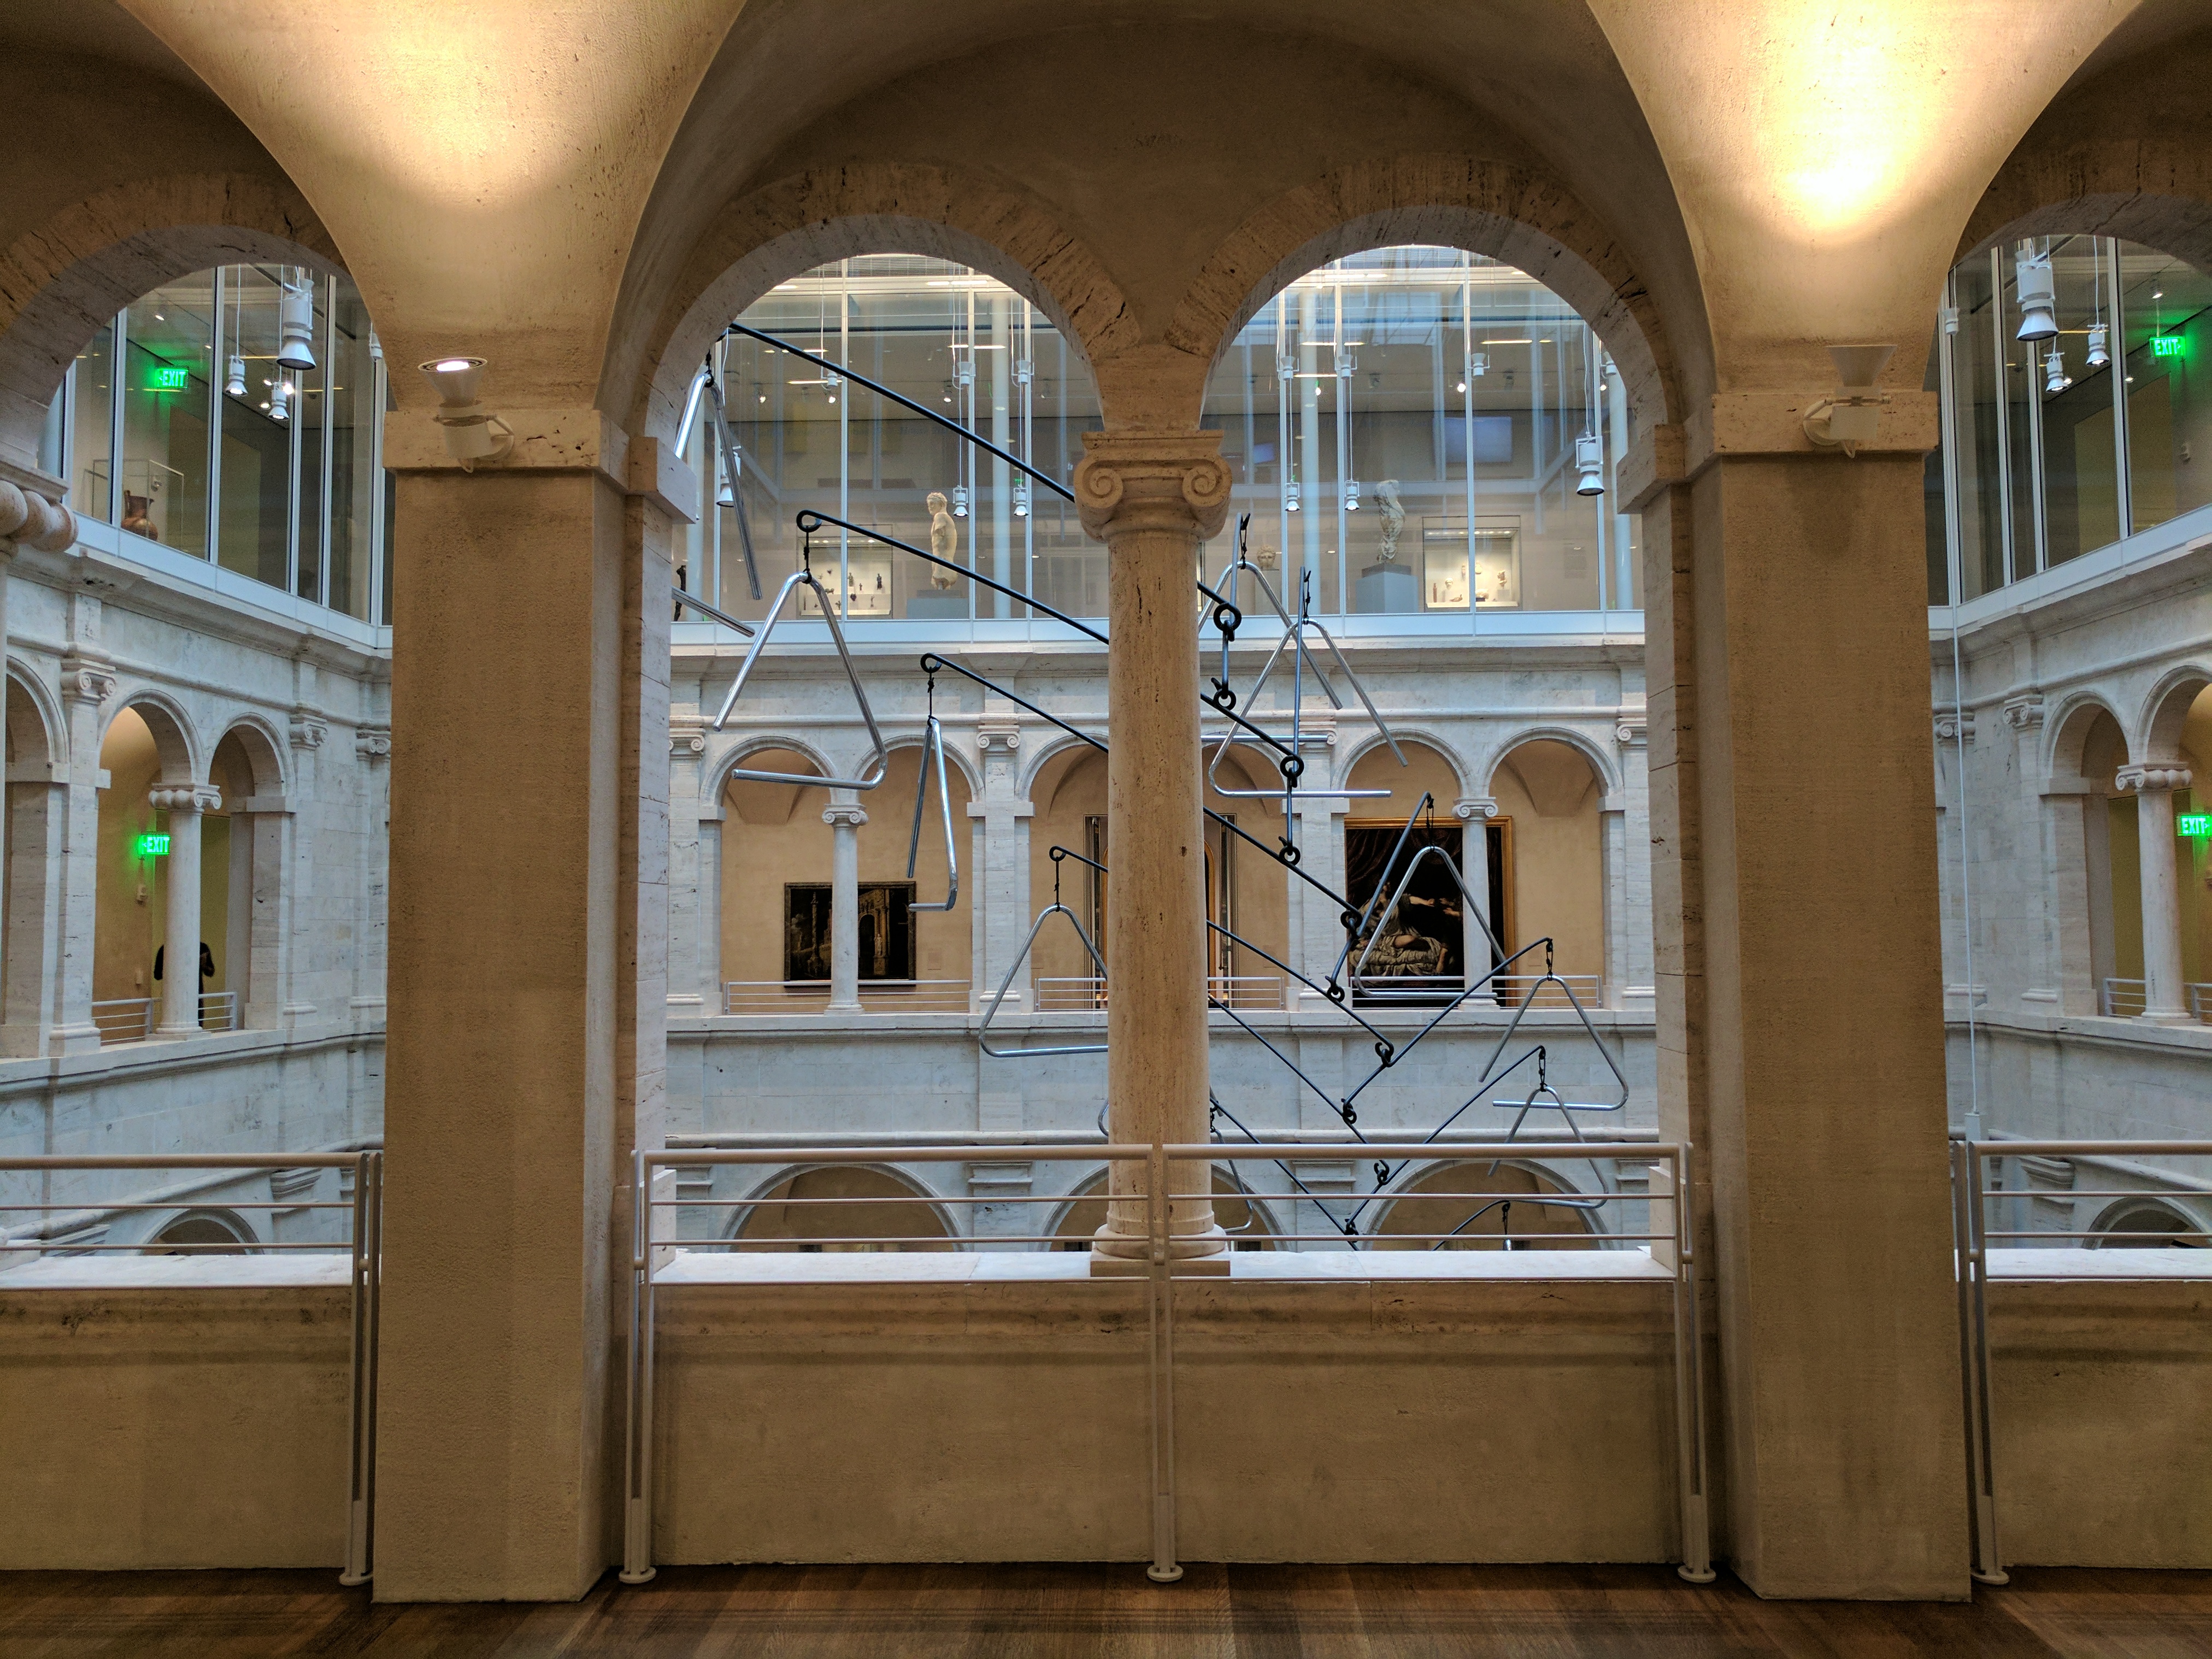 An image of the atrium taken from the second floor stairwell of the HAM.